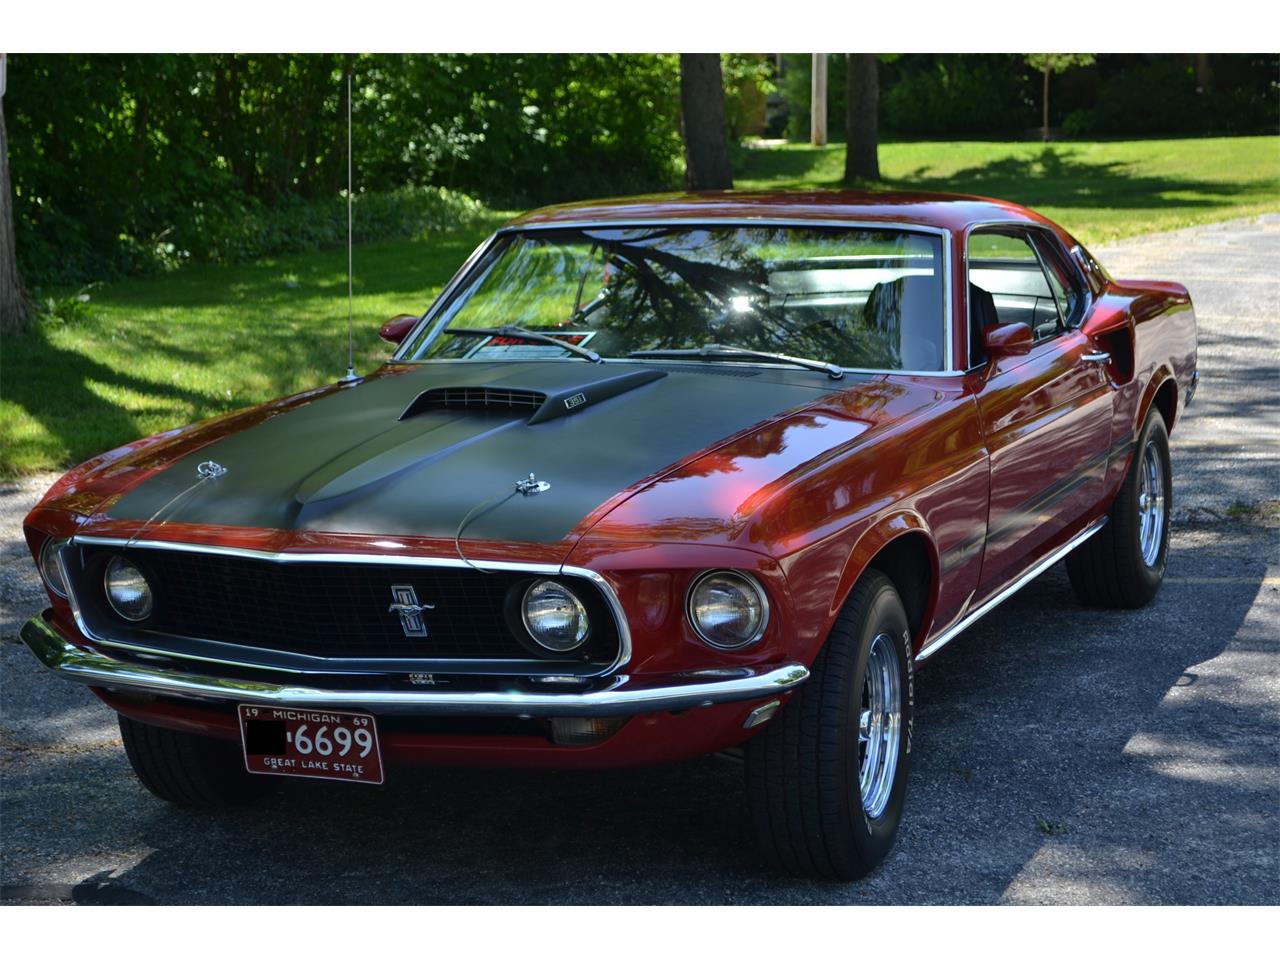 1969 Ford Mustang Mach 1 Value